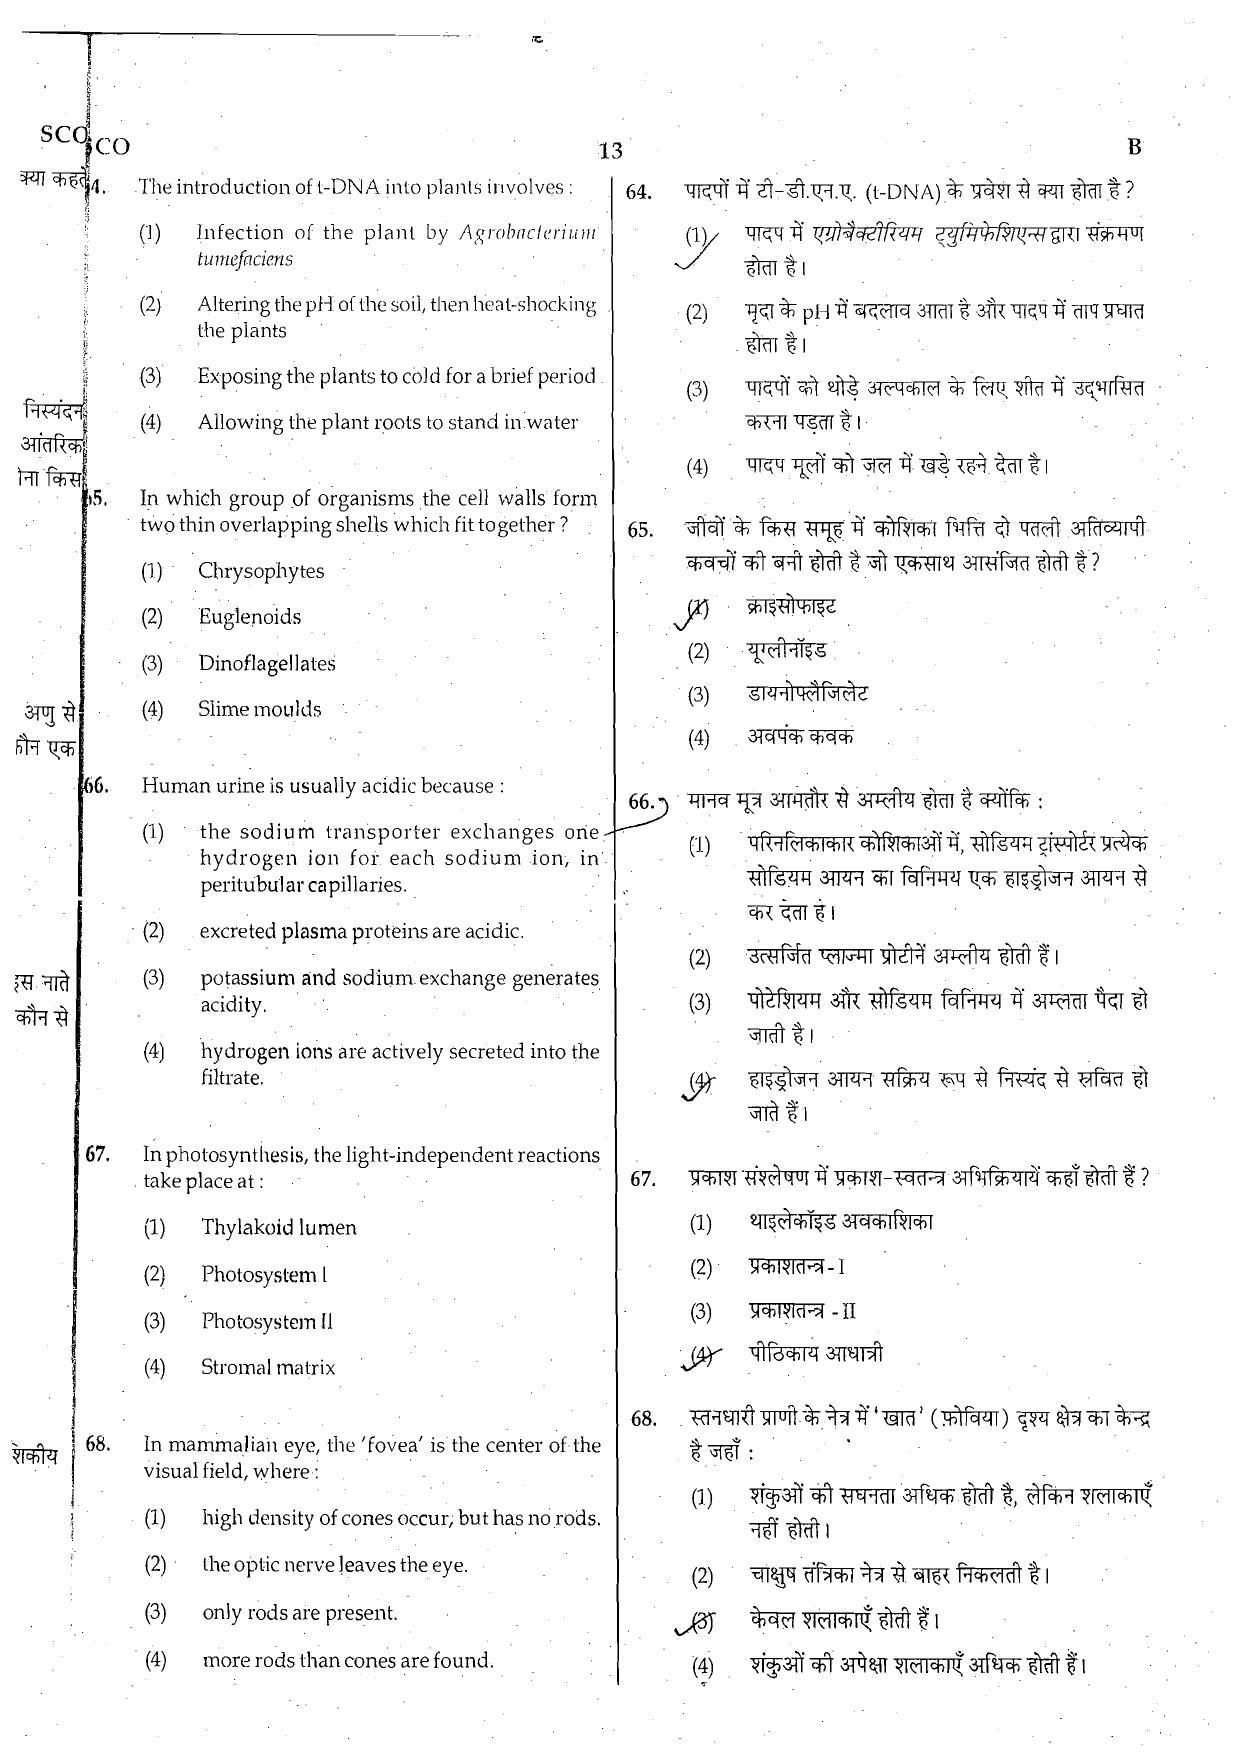 NEET Code B 2015 Question Paper - Page 13